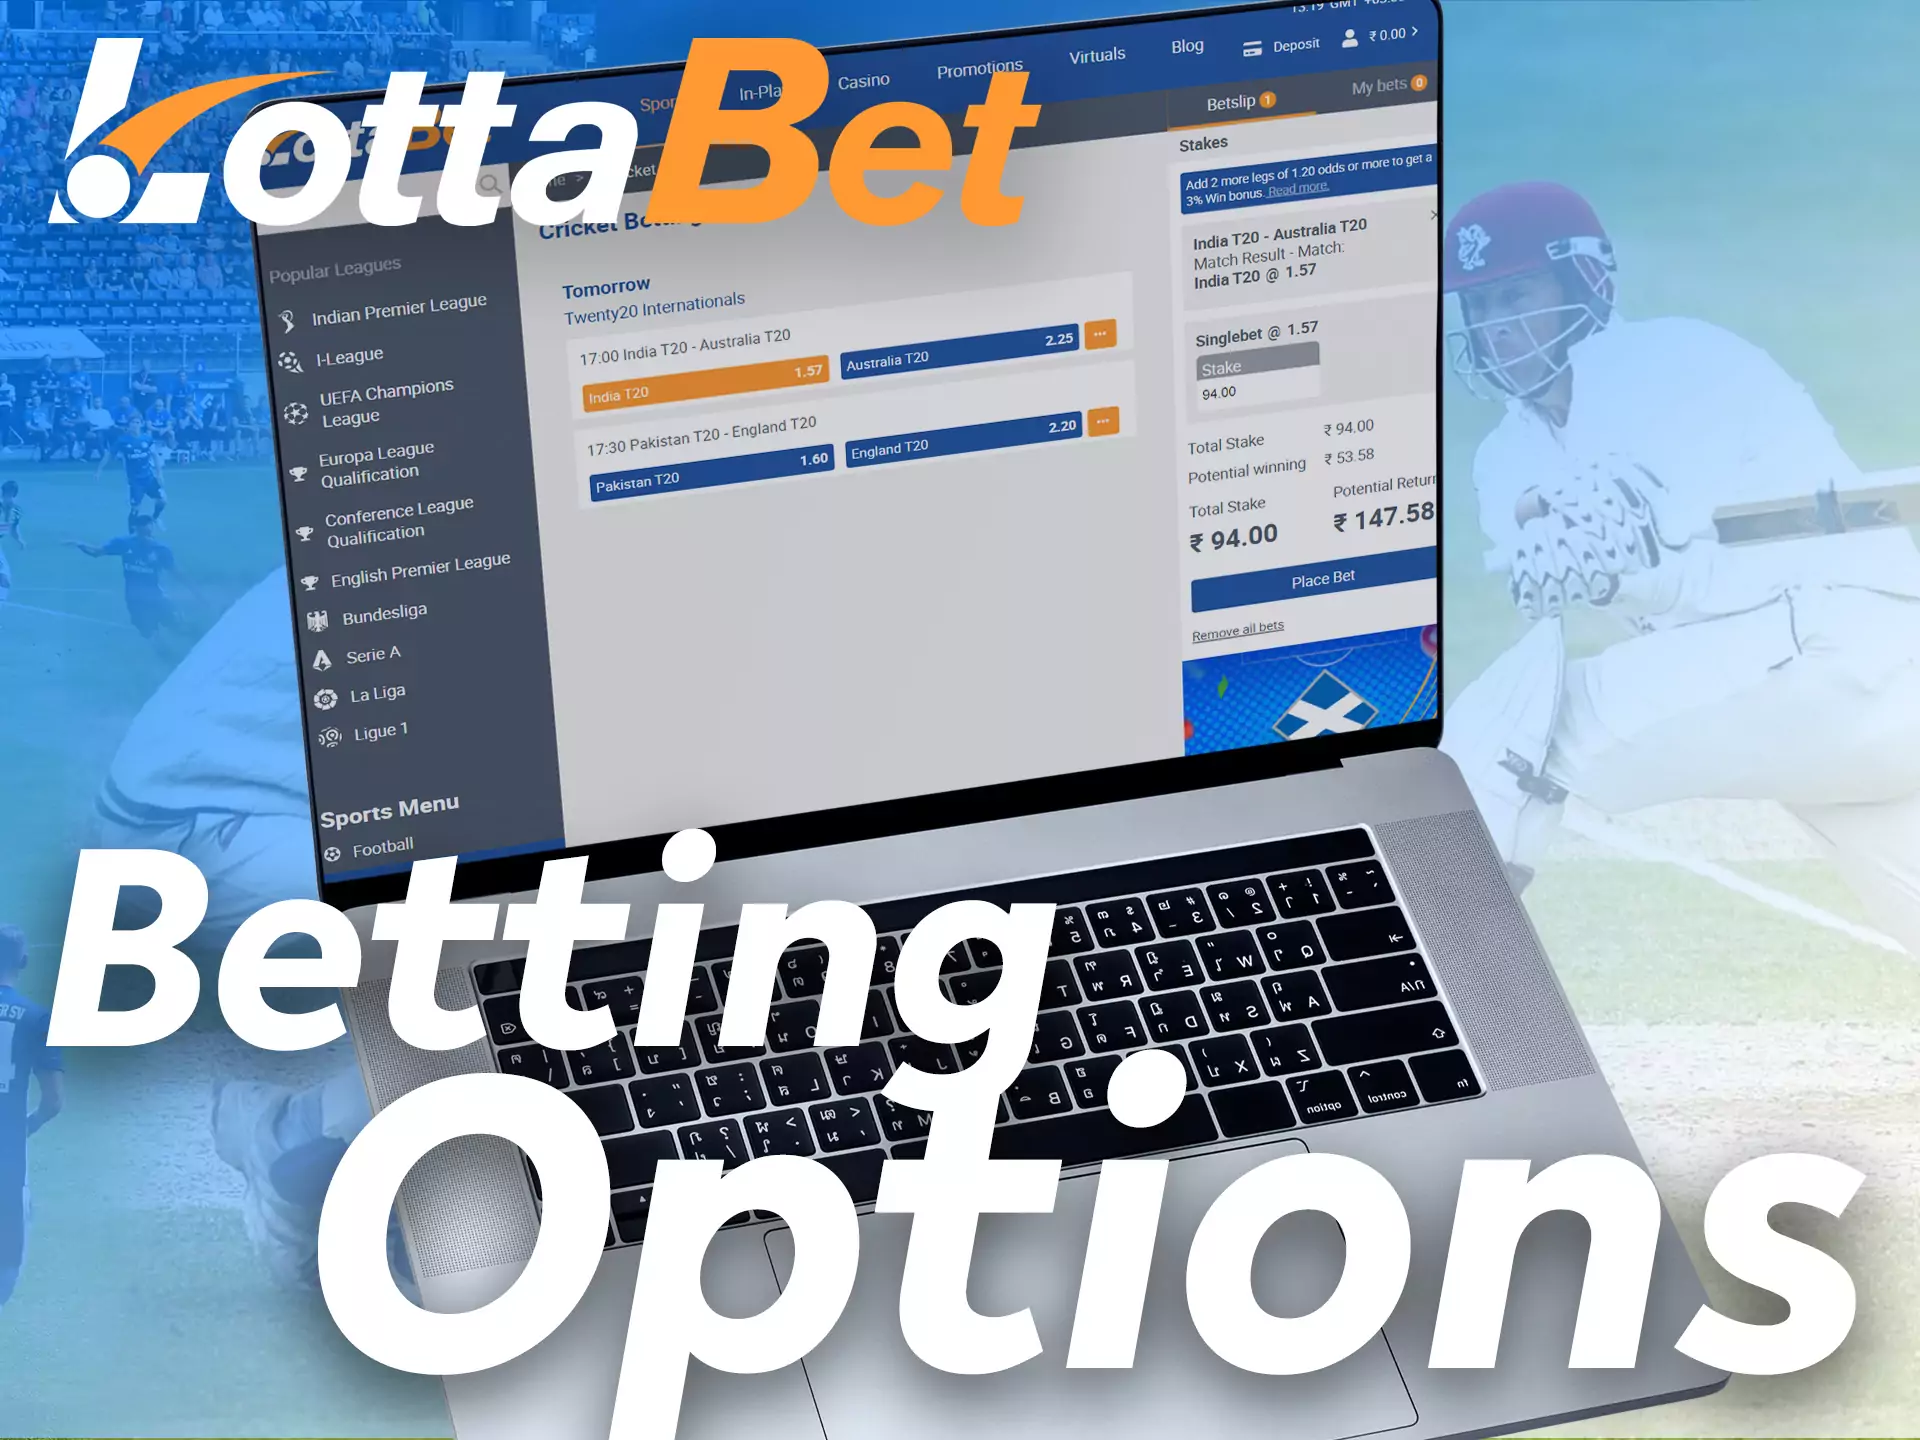 On the Lottabet website, you can bet live and beforehand.